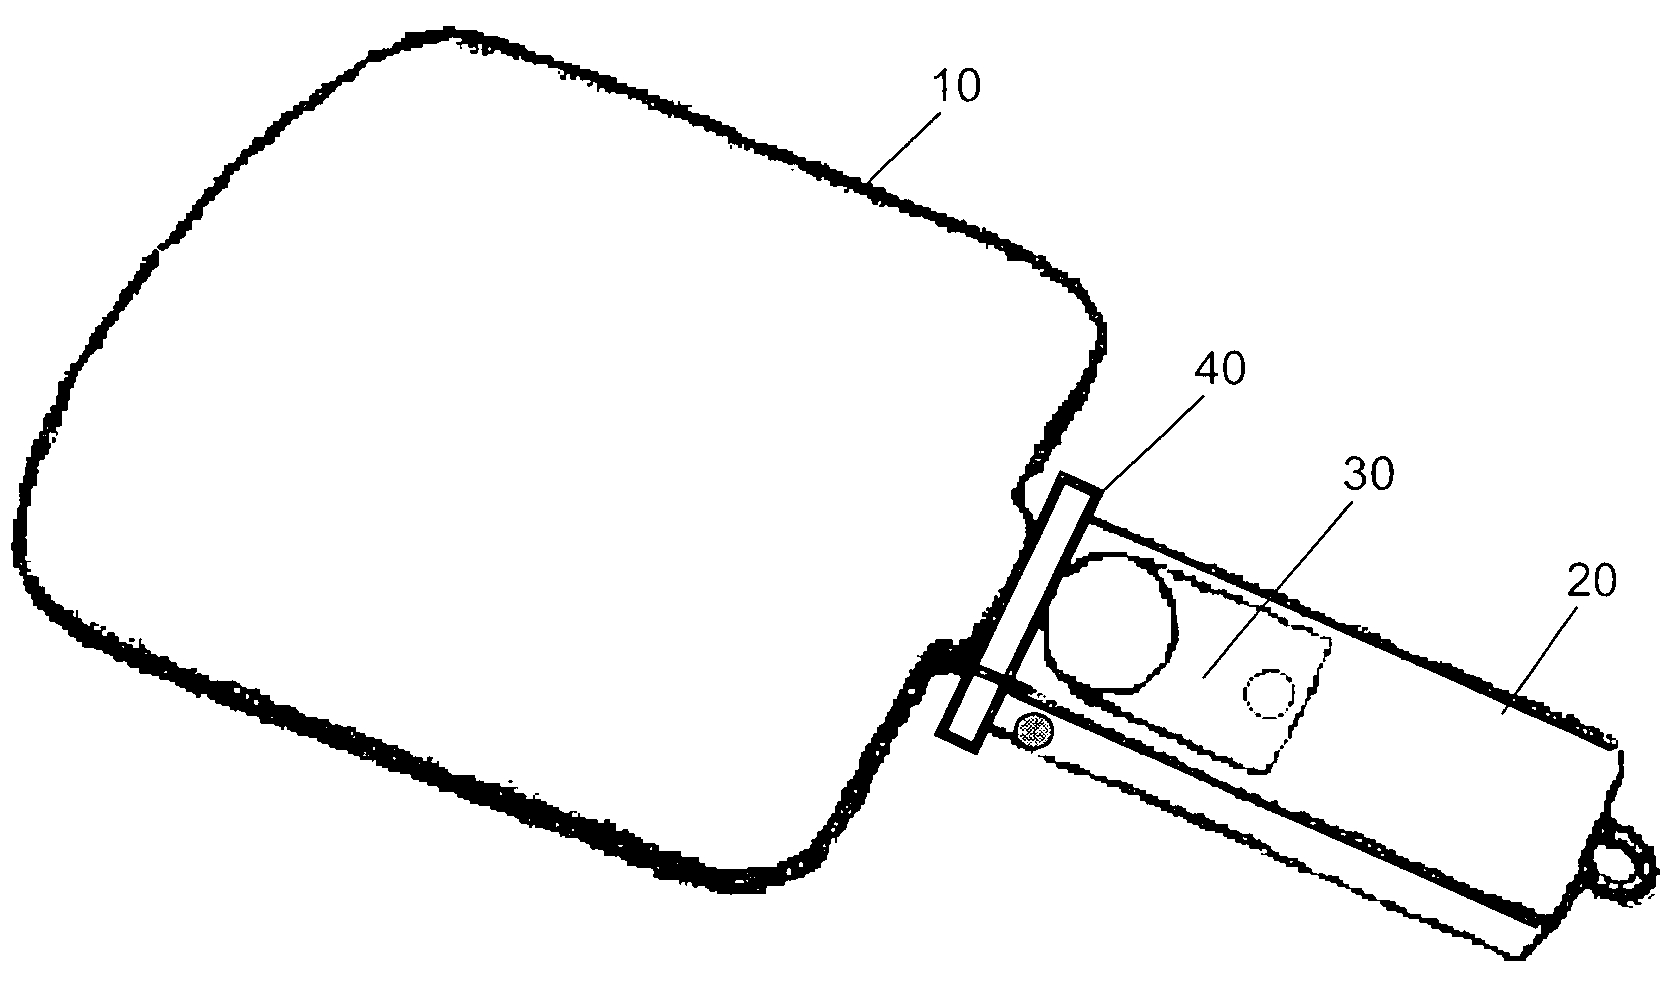 Percussion instrument and noisemaking device